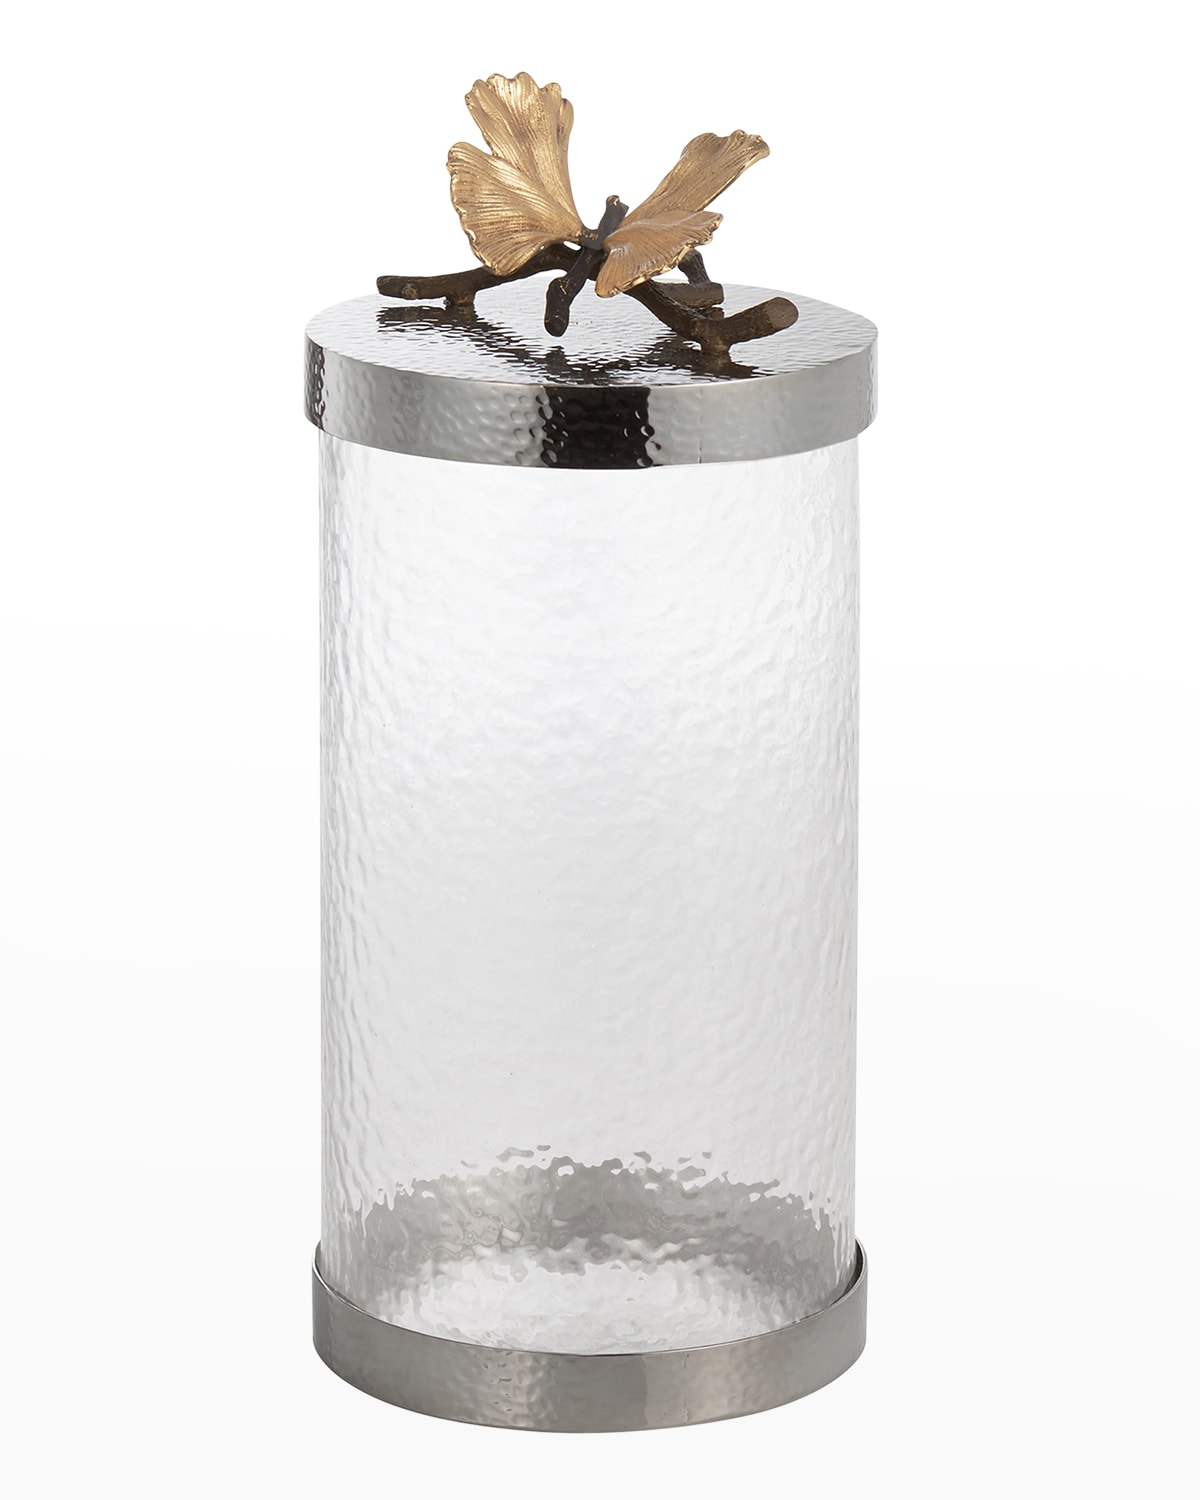 Michael Aram Butterfly Ginkgo Large Canister